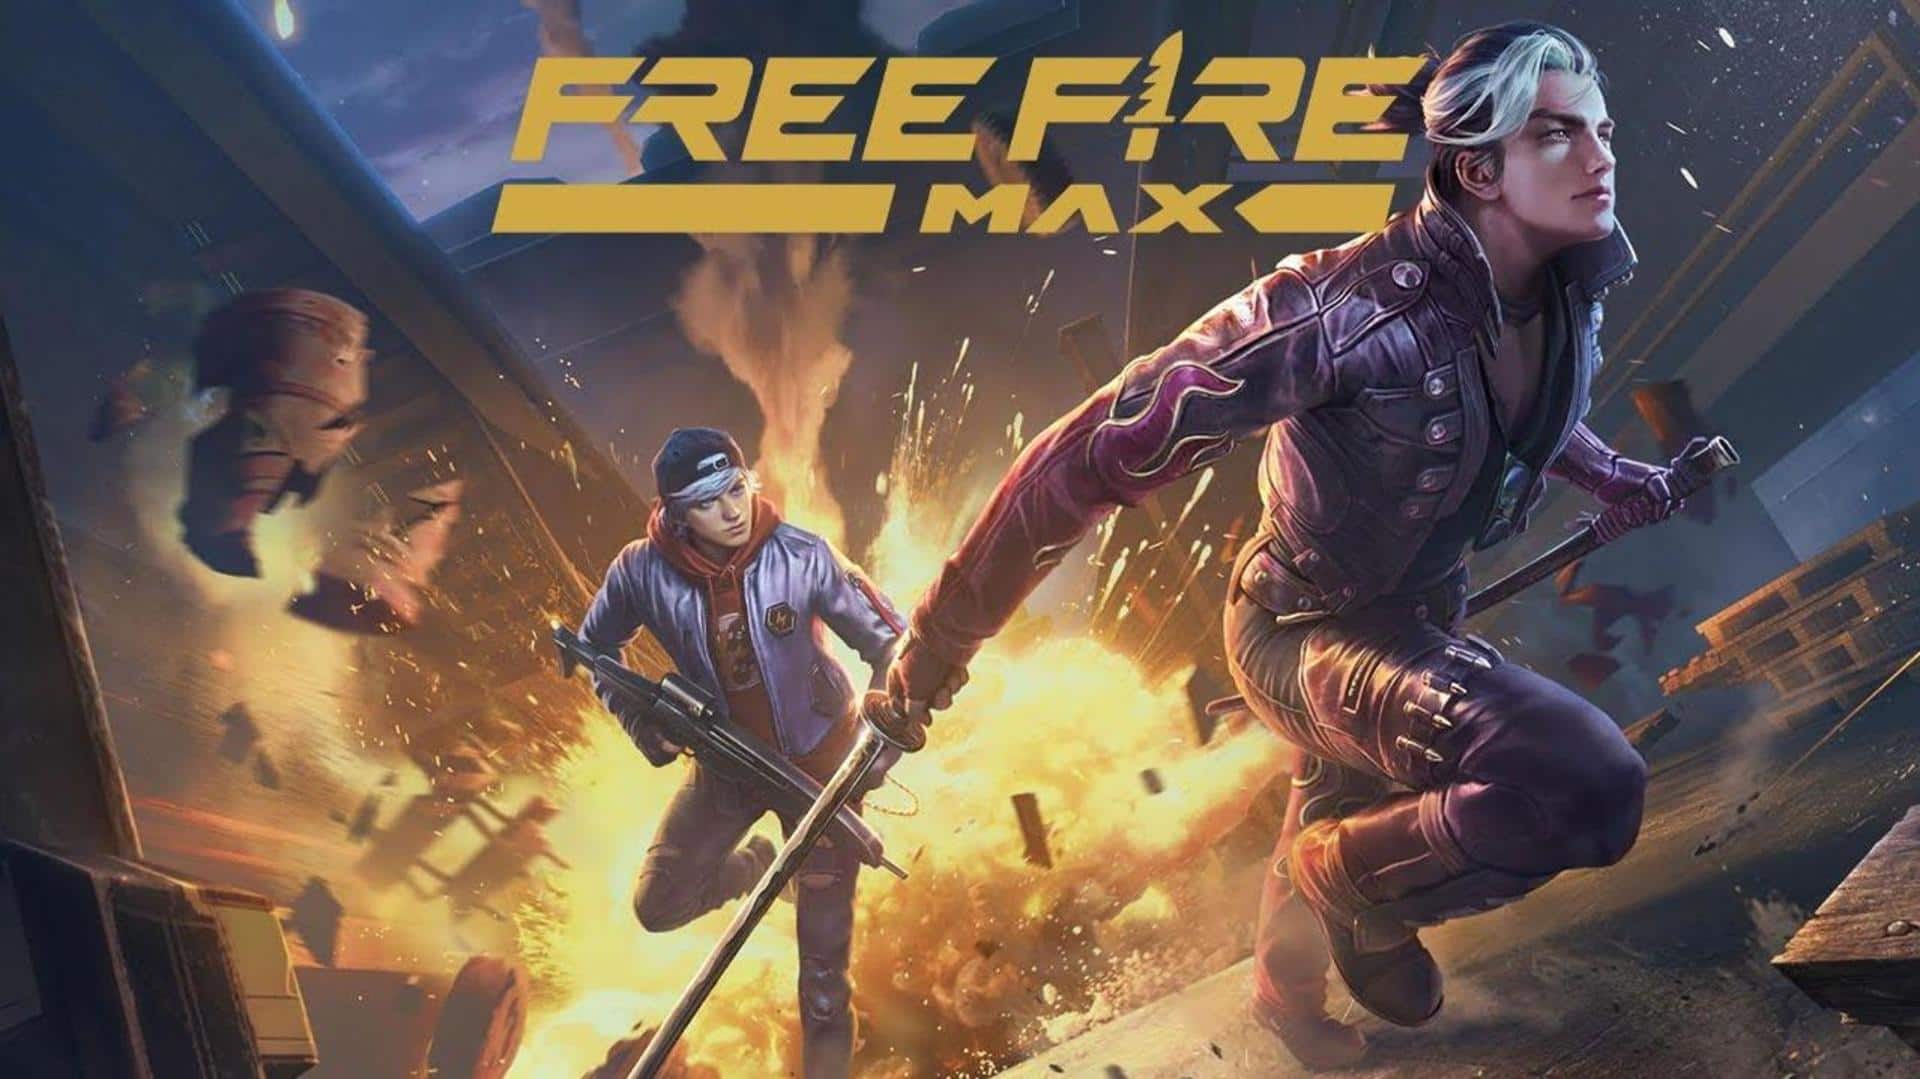 Garena Free Fire MAX: Redeem codes for July 3